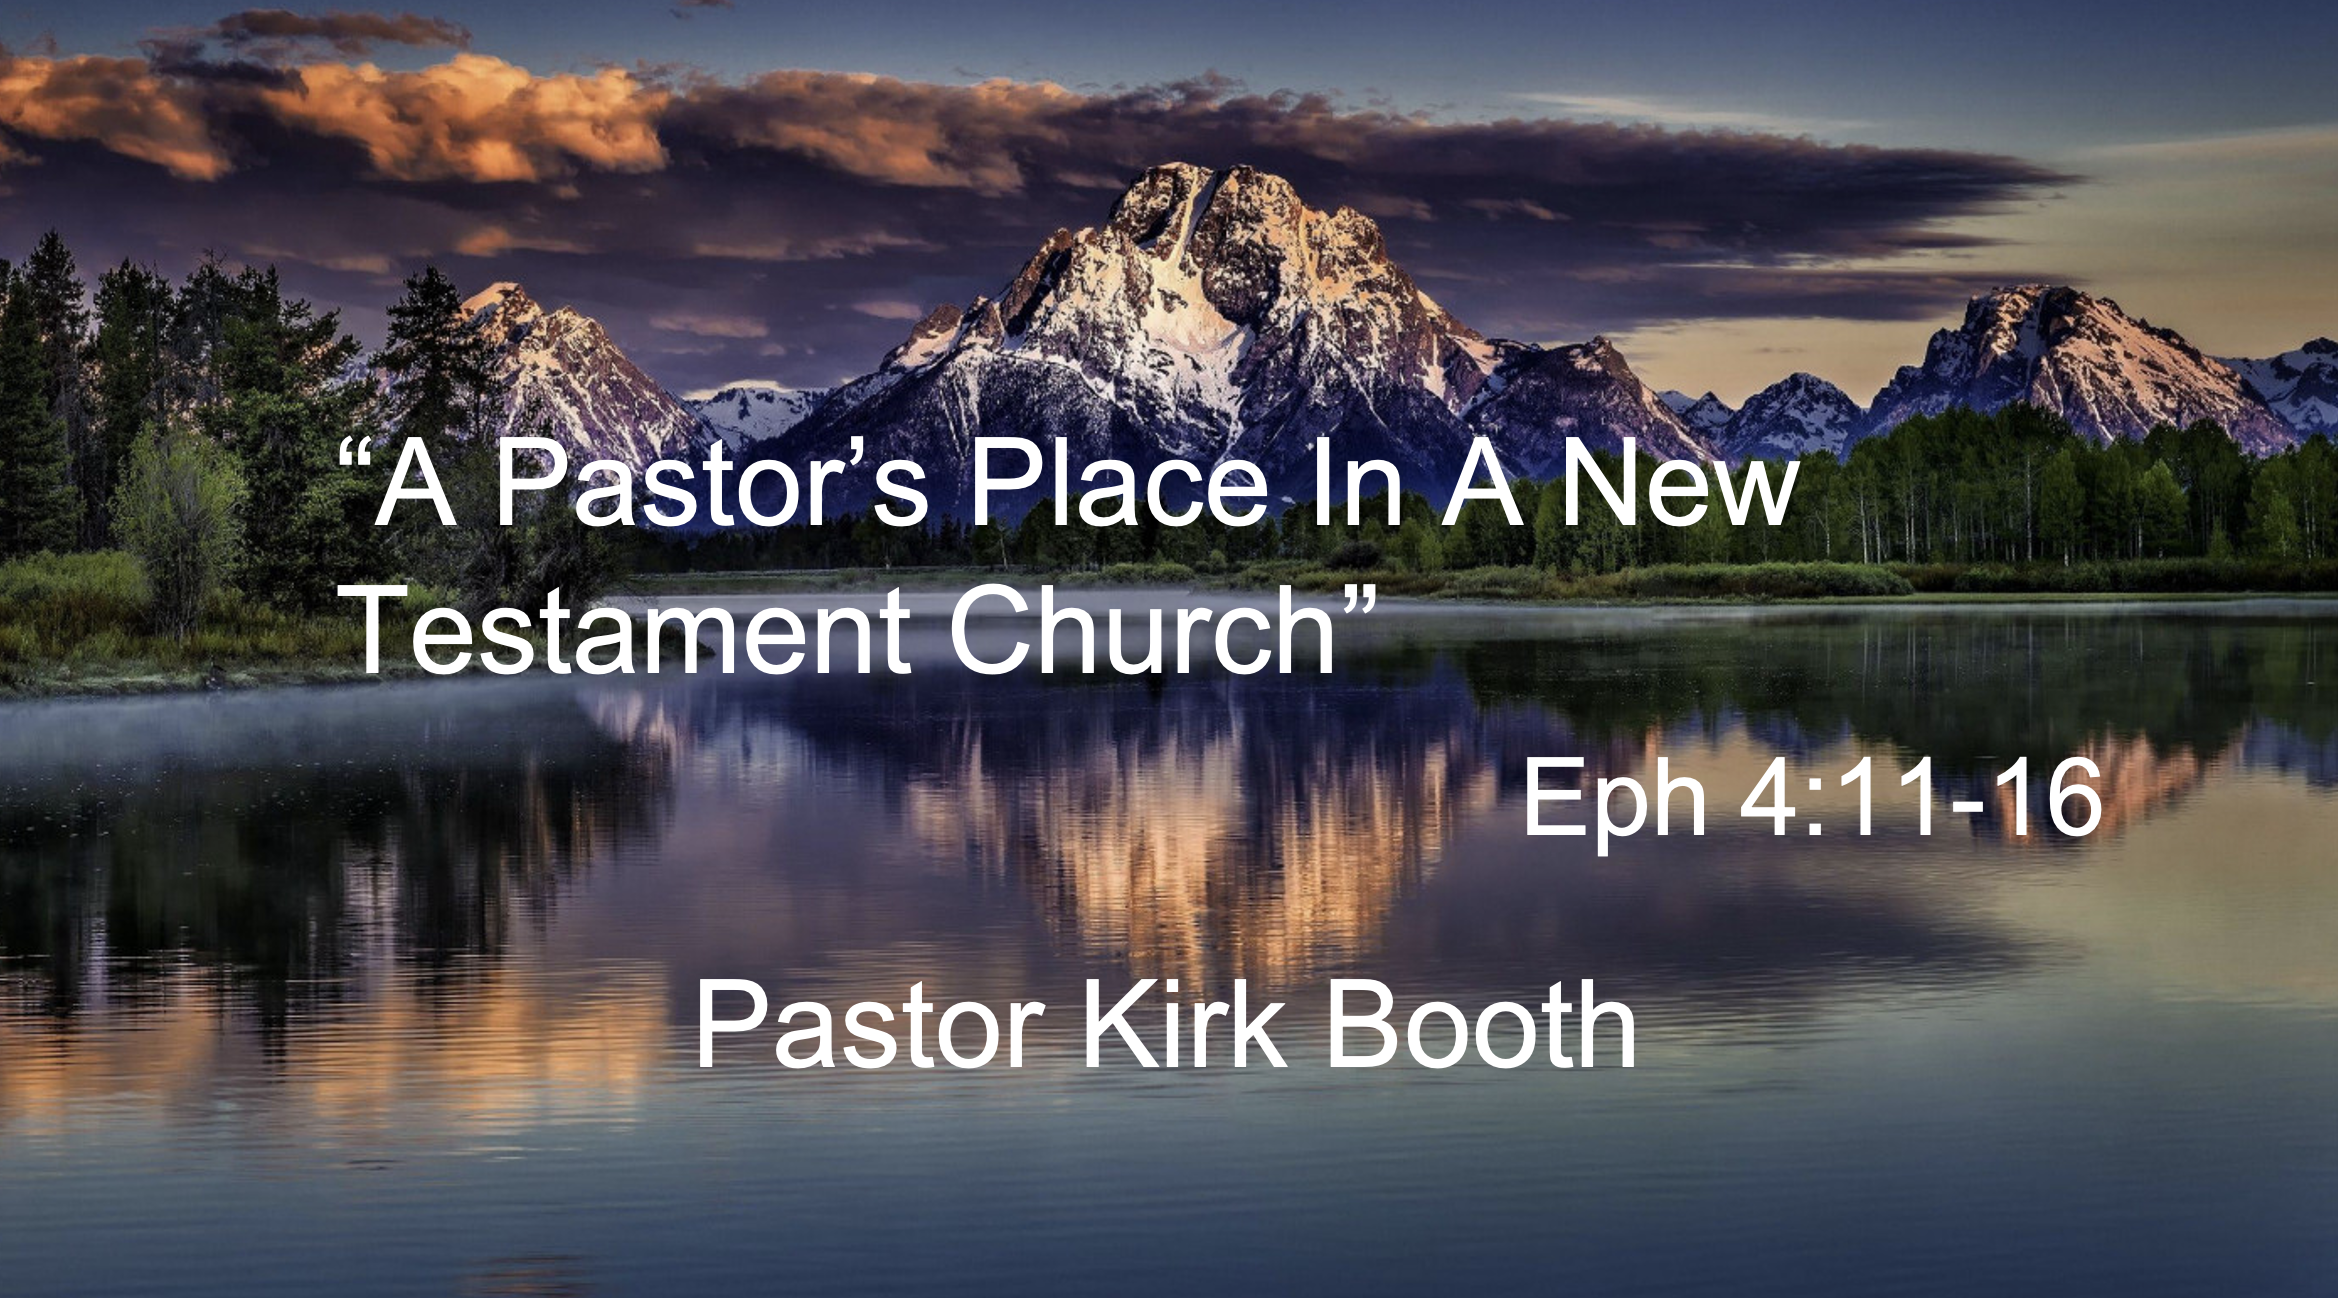 A Pastor's Place In A New Testament Church